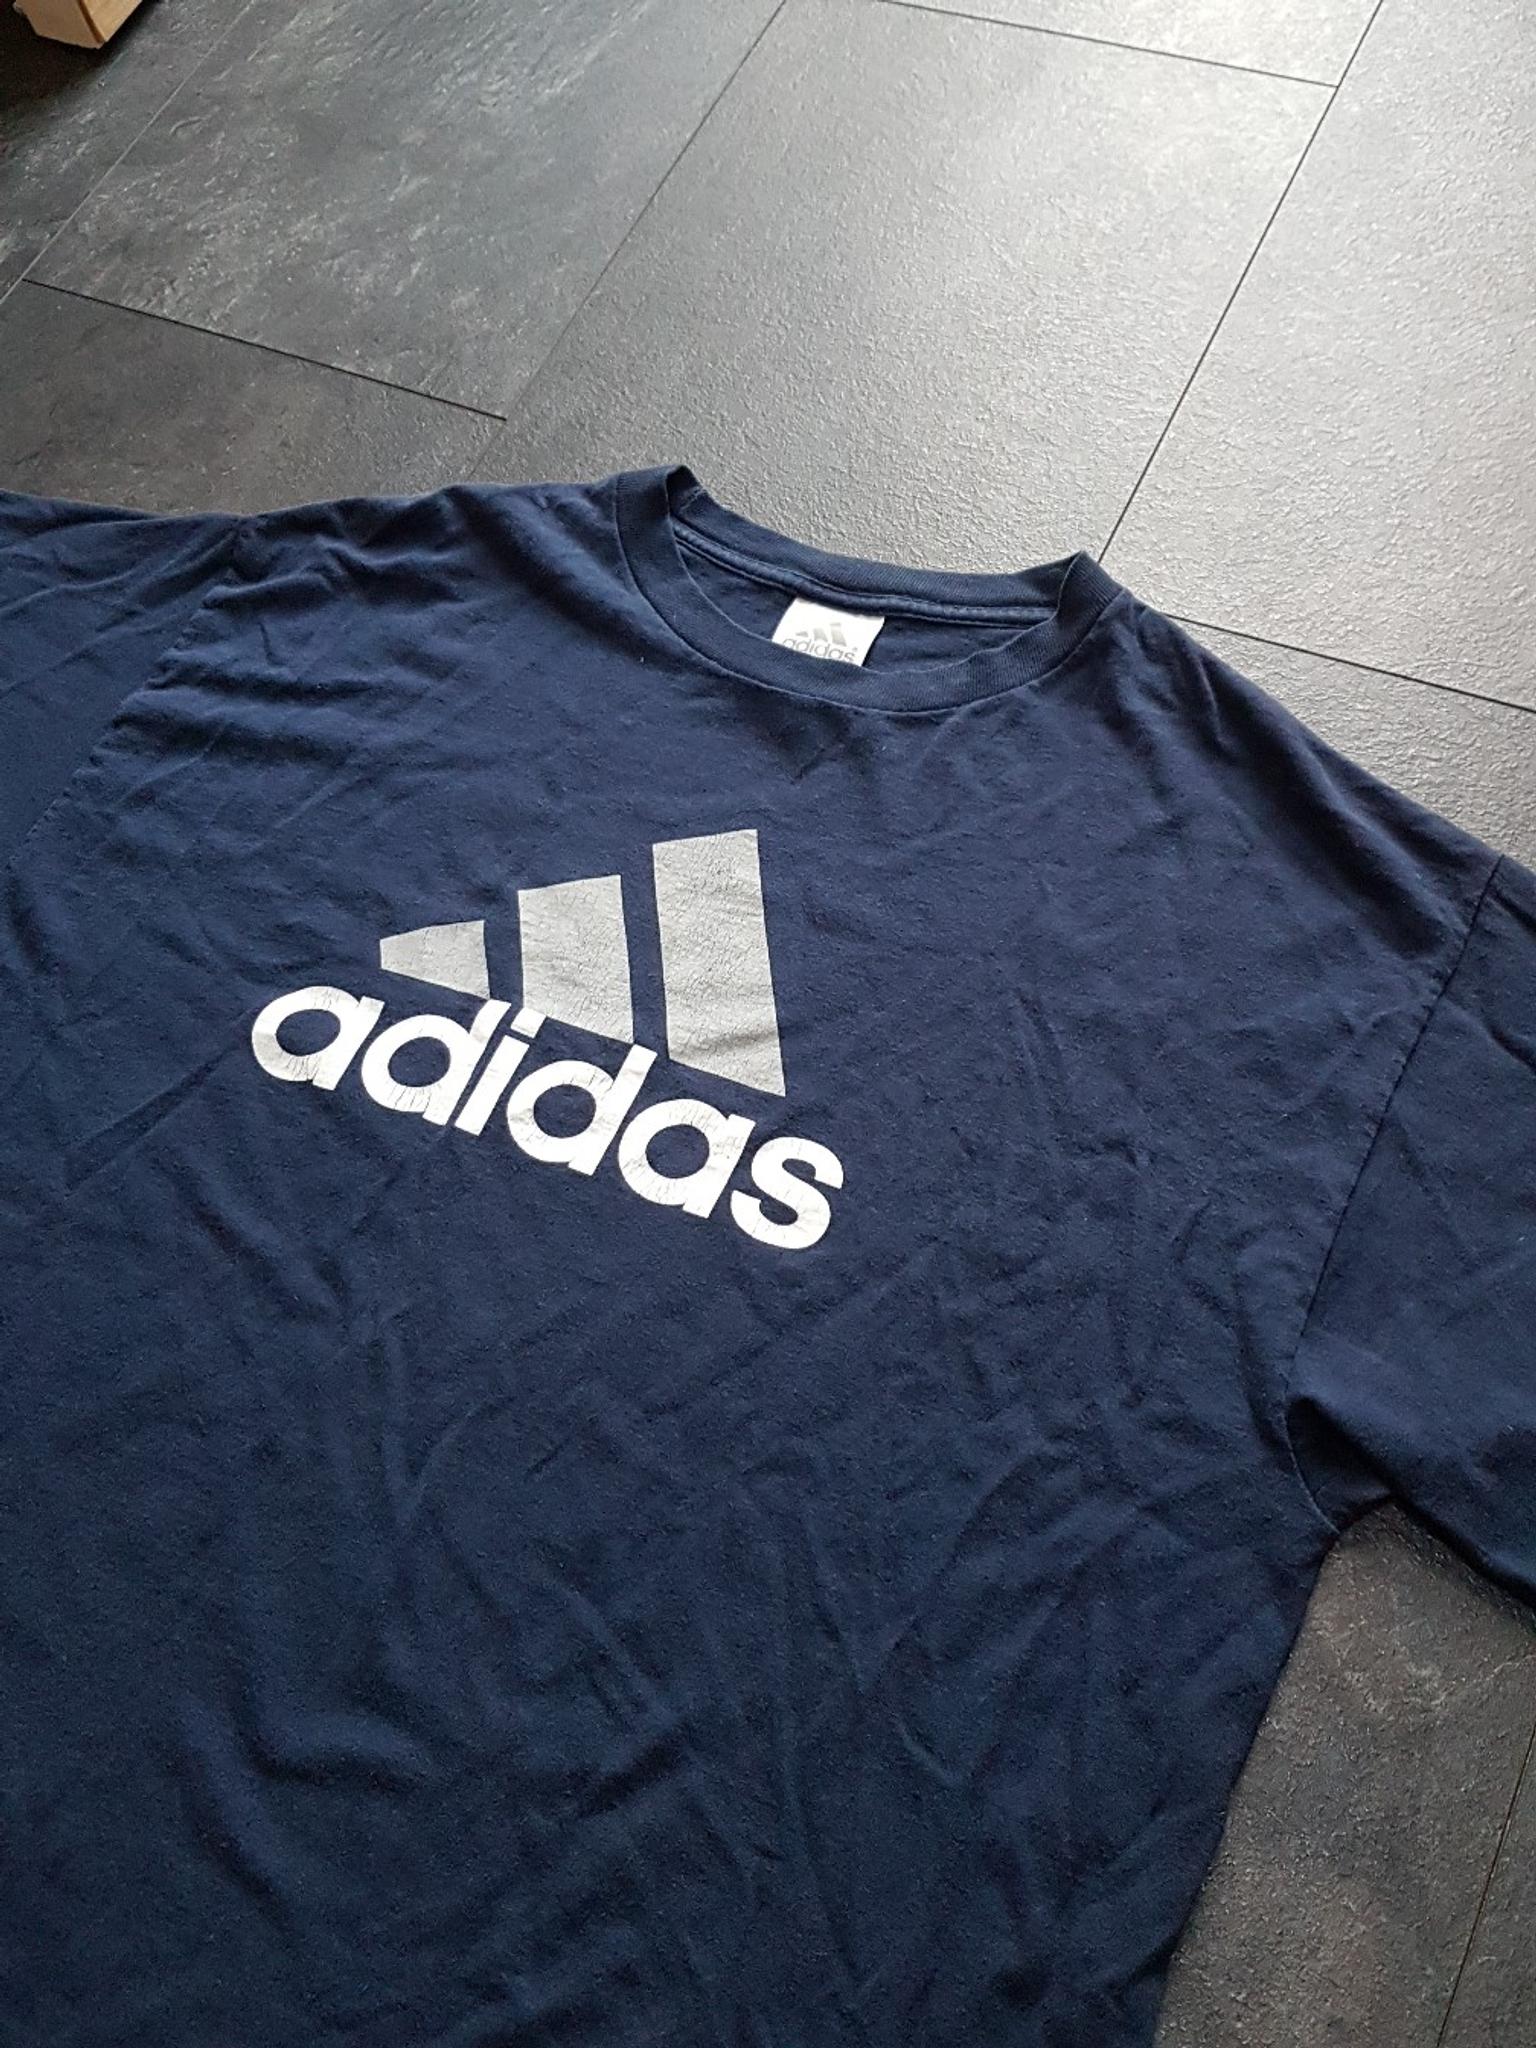 Adidas T Shirt in CT9 Thanet for £15.00 